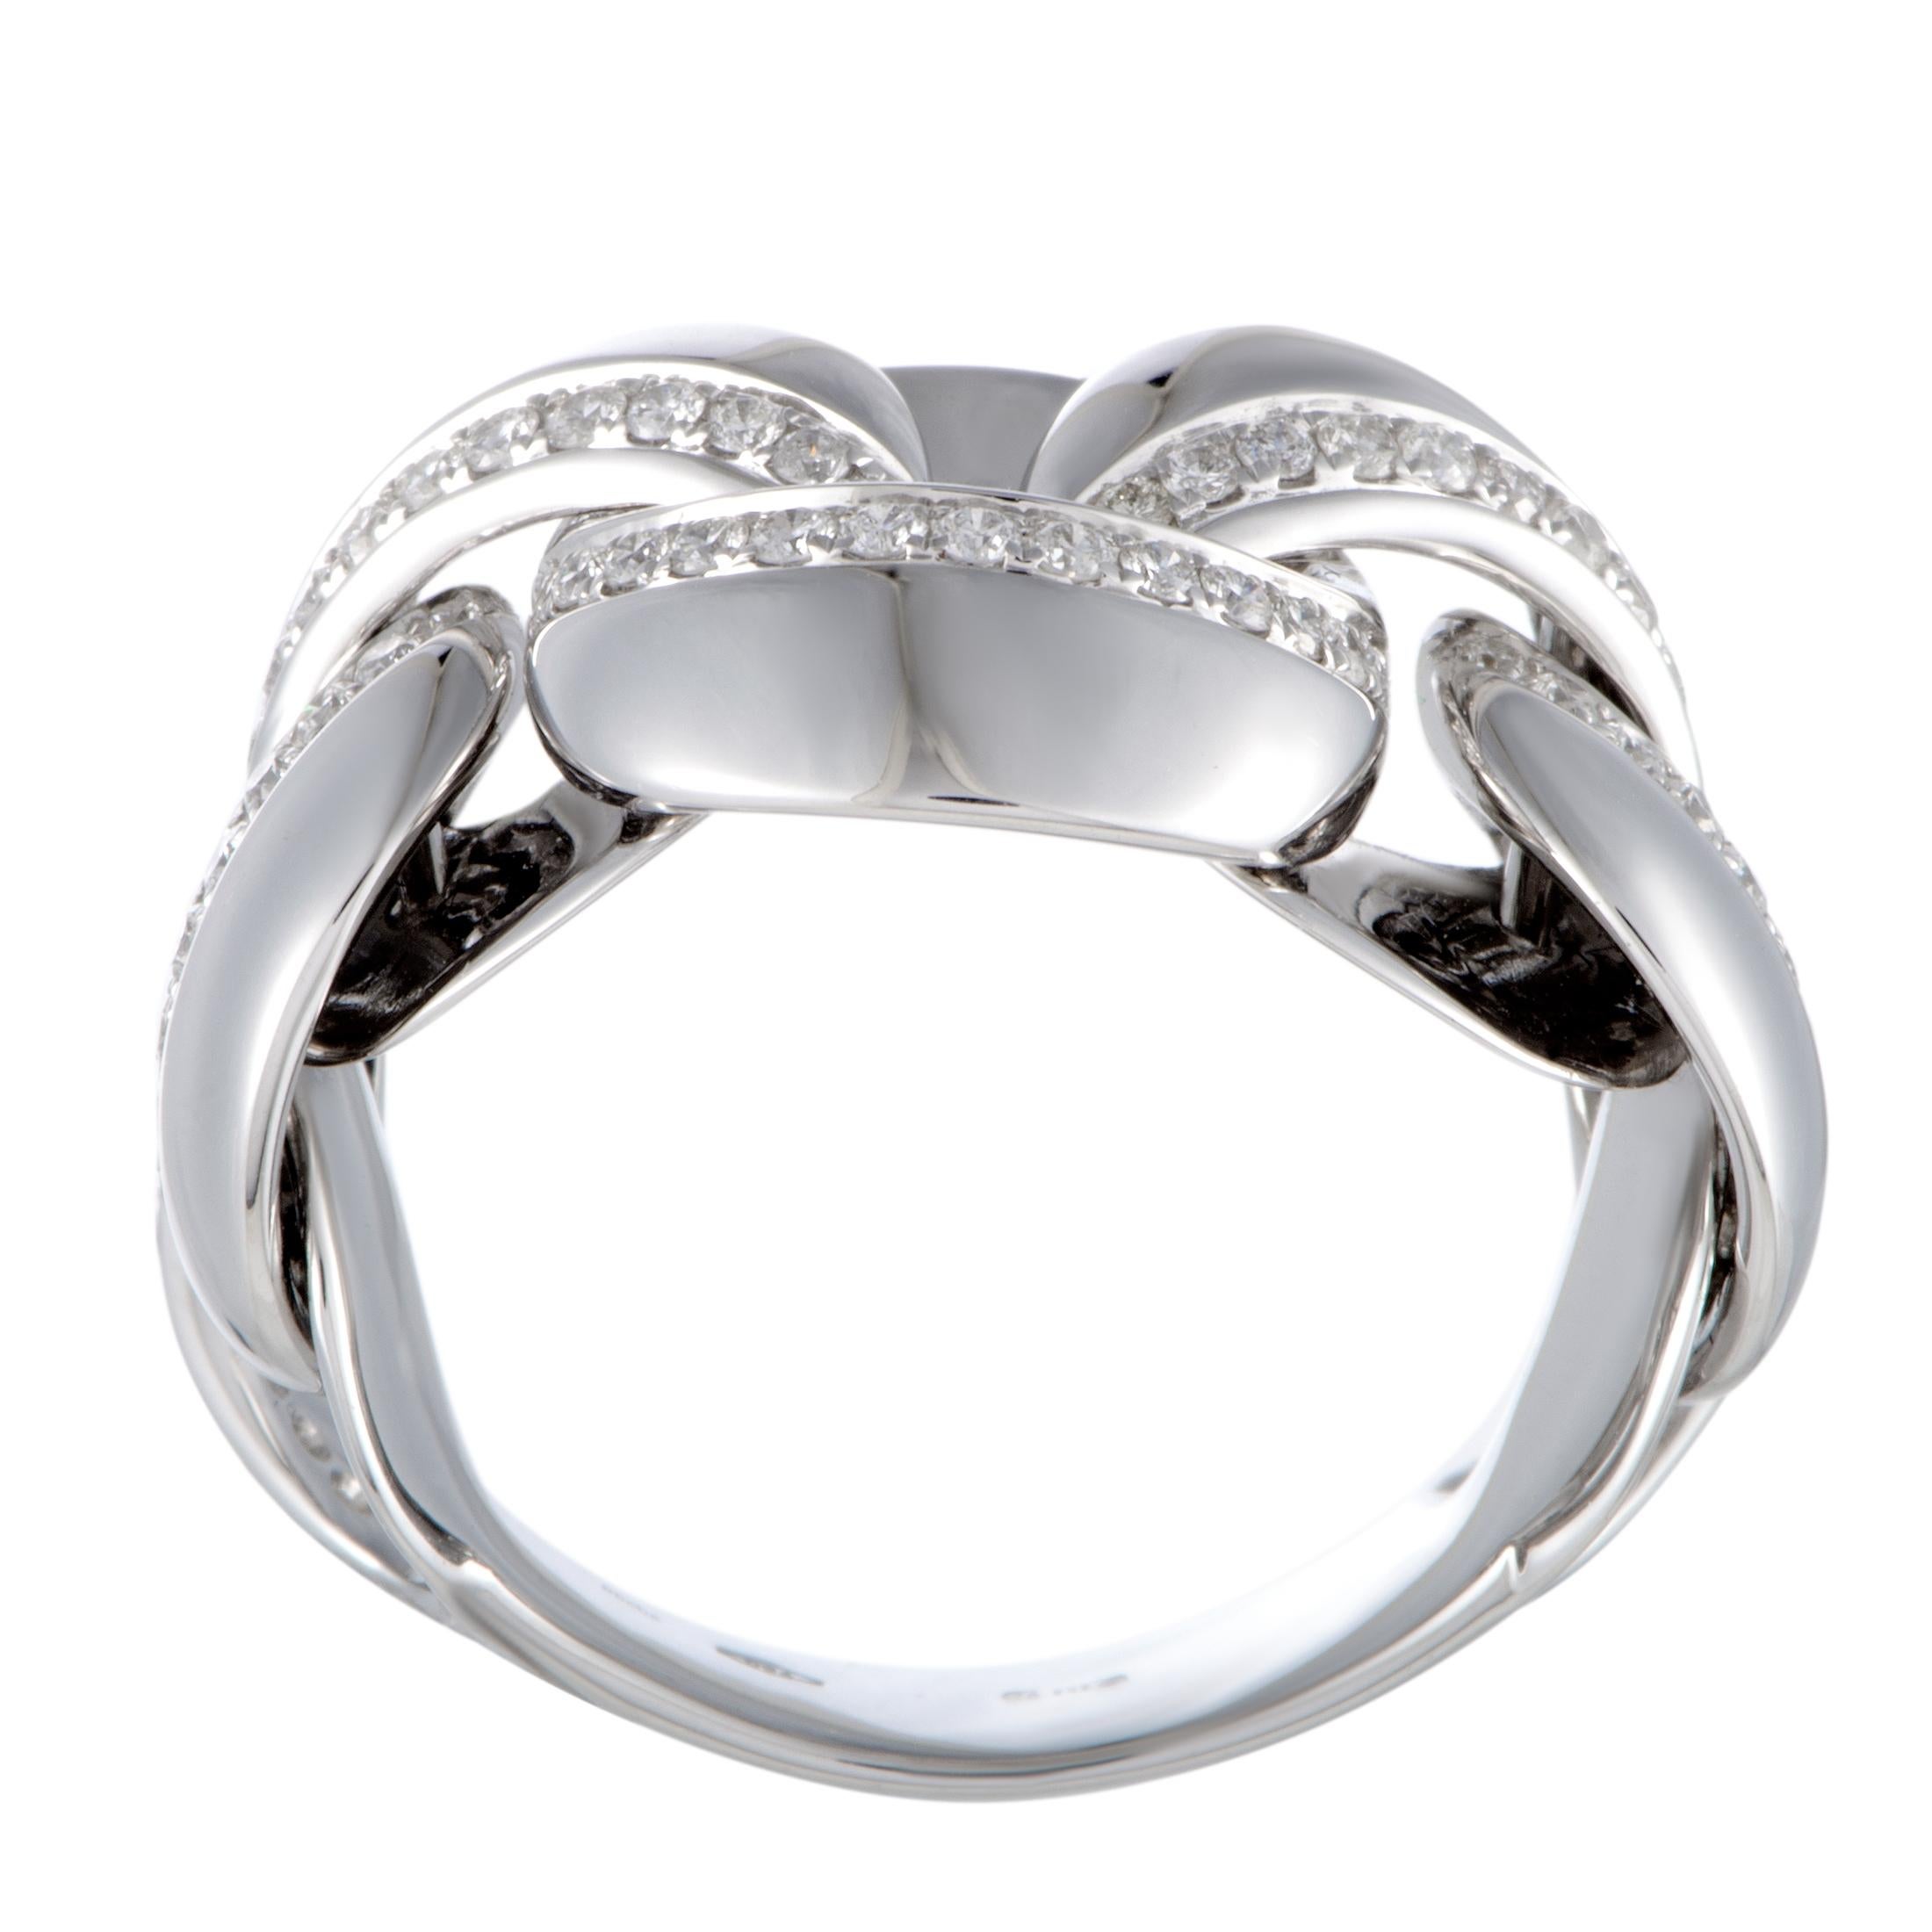 If you wish to accentuate your ensemble in a manner that is both incredibly luxurious and distinctly sophisticated then this fabulous jewelry piece is an excellent choice. Beautifully designed by Chimento, this ring is expertly crafted from